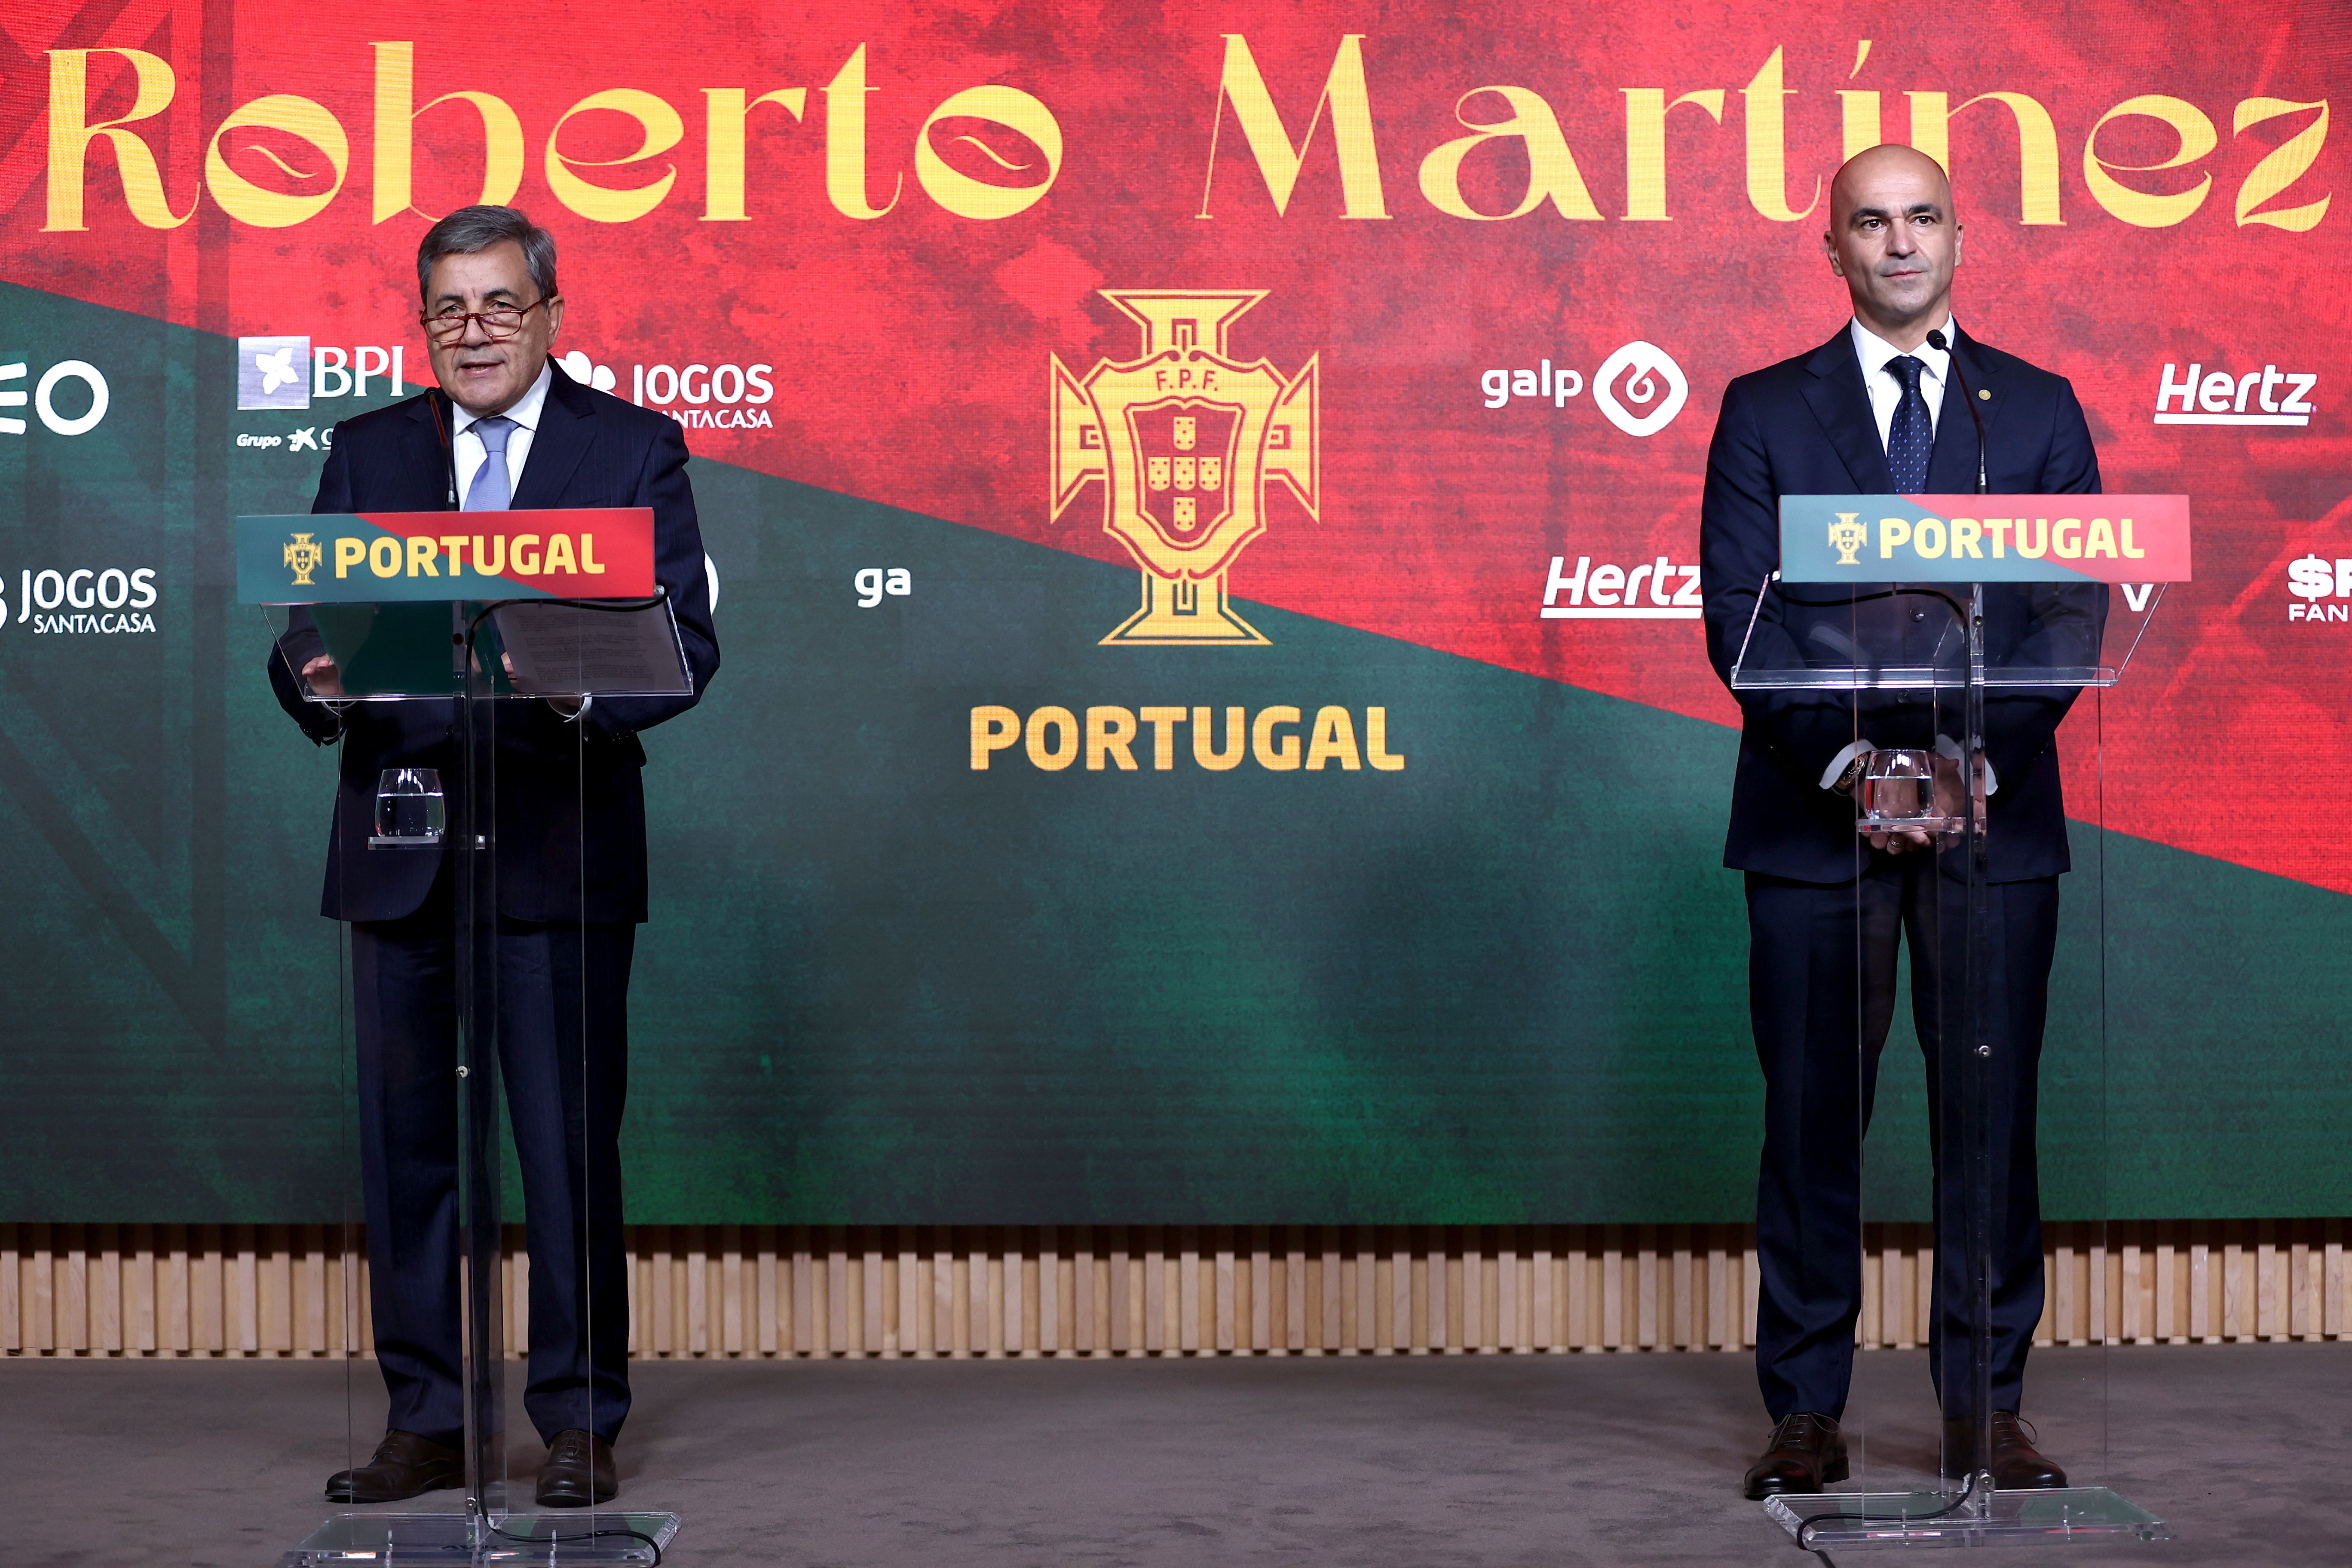 A New Identity for a New Portugal Under Martínez?